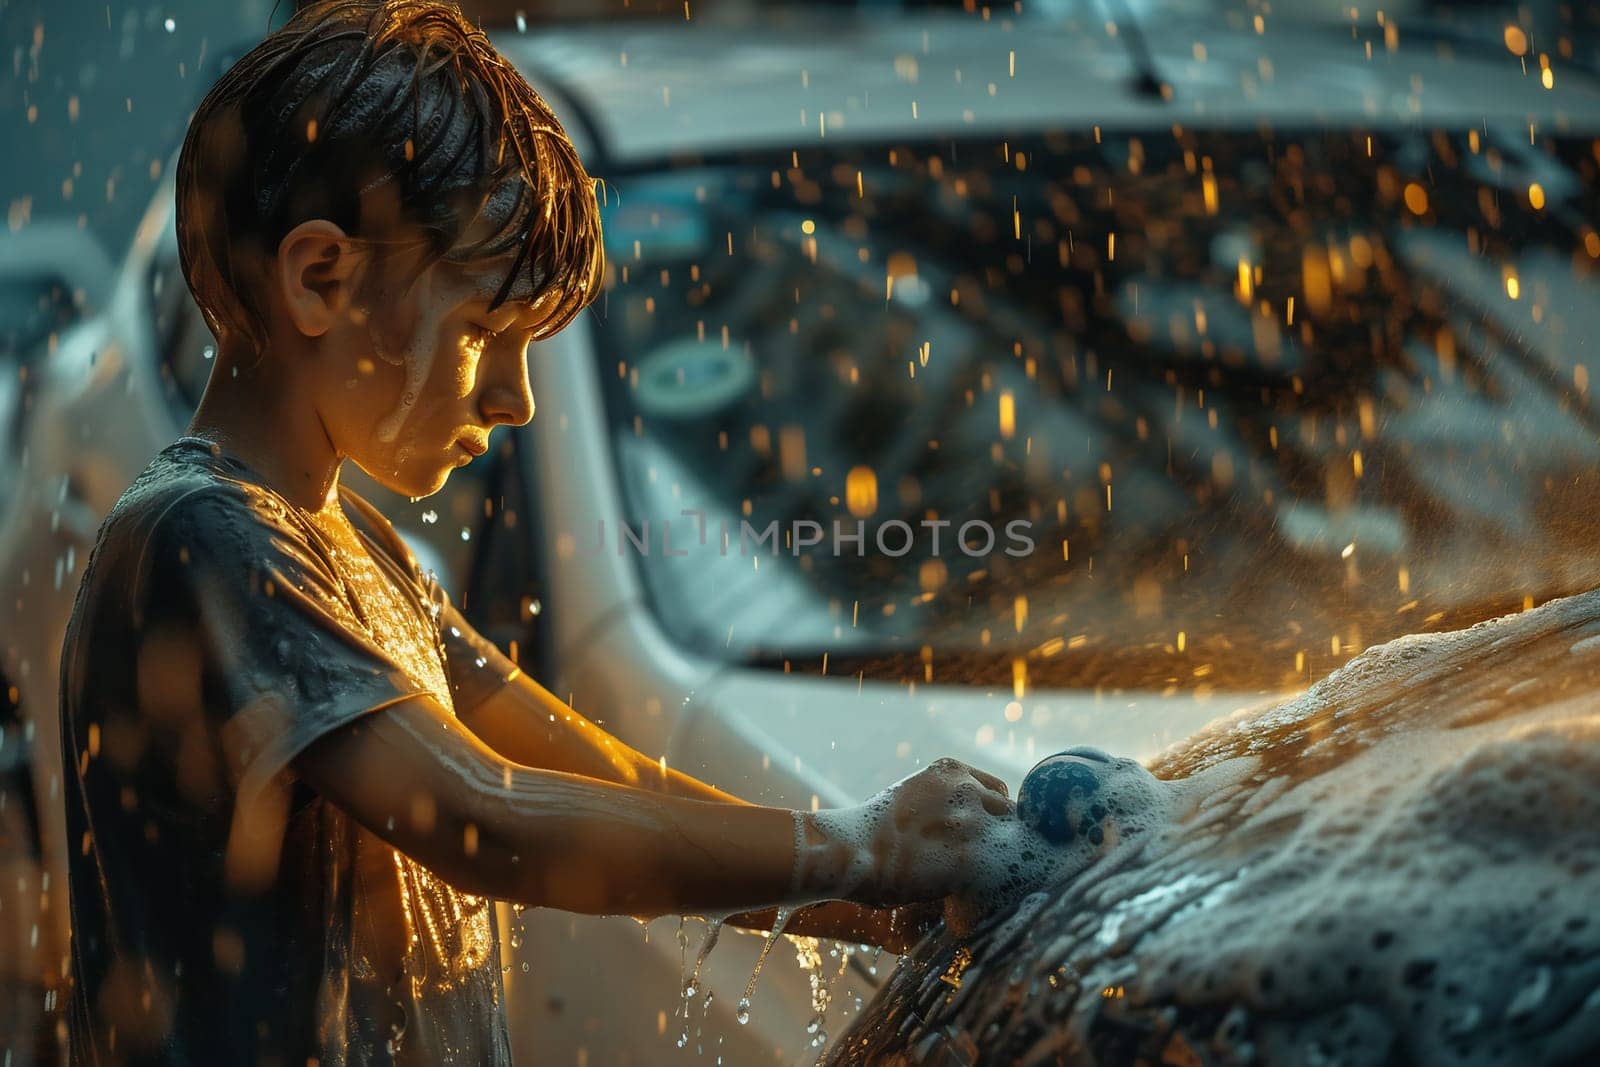 Closeup side view of a young boy washing car with sponge by Andelov13